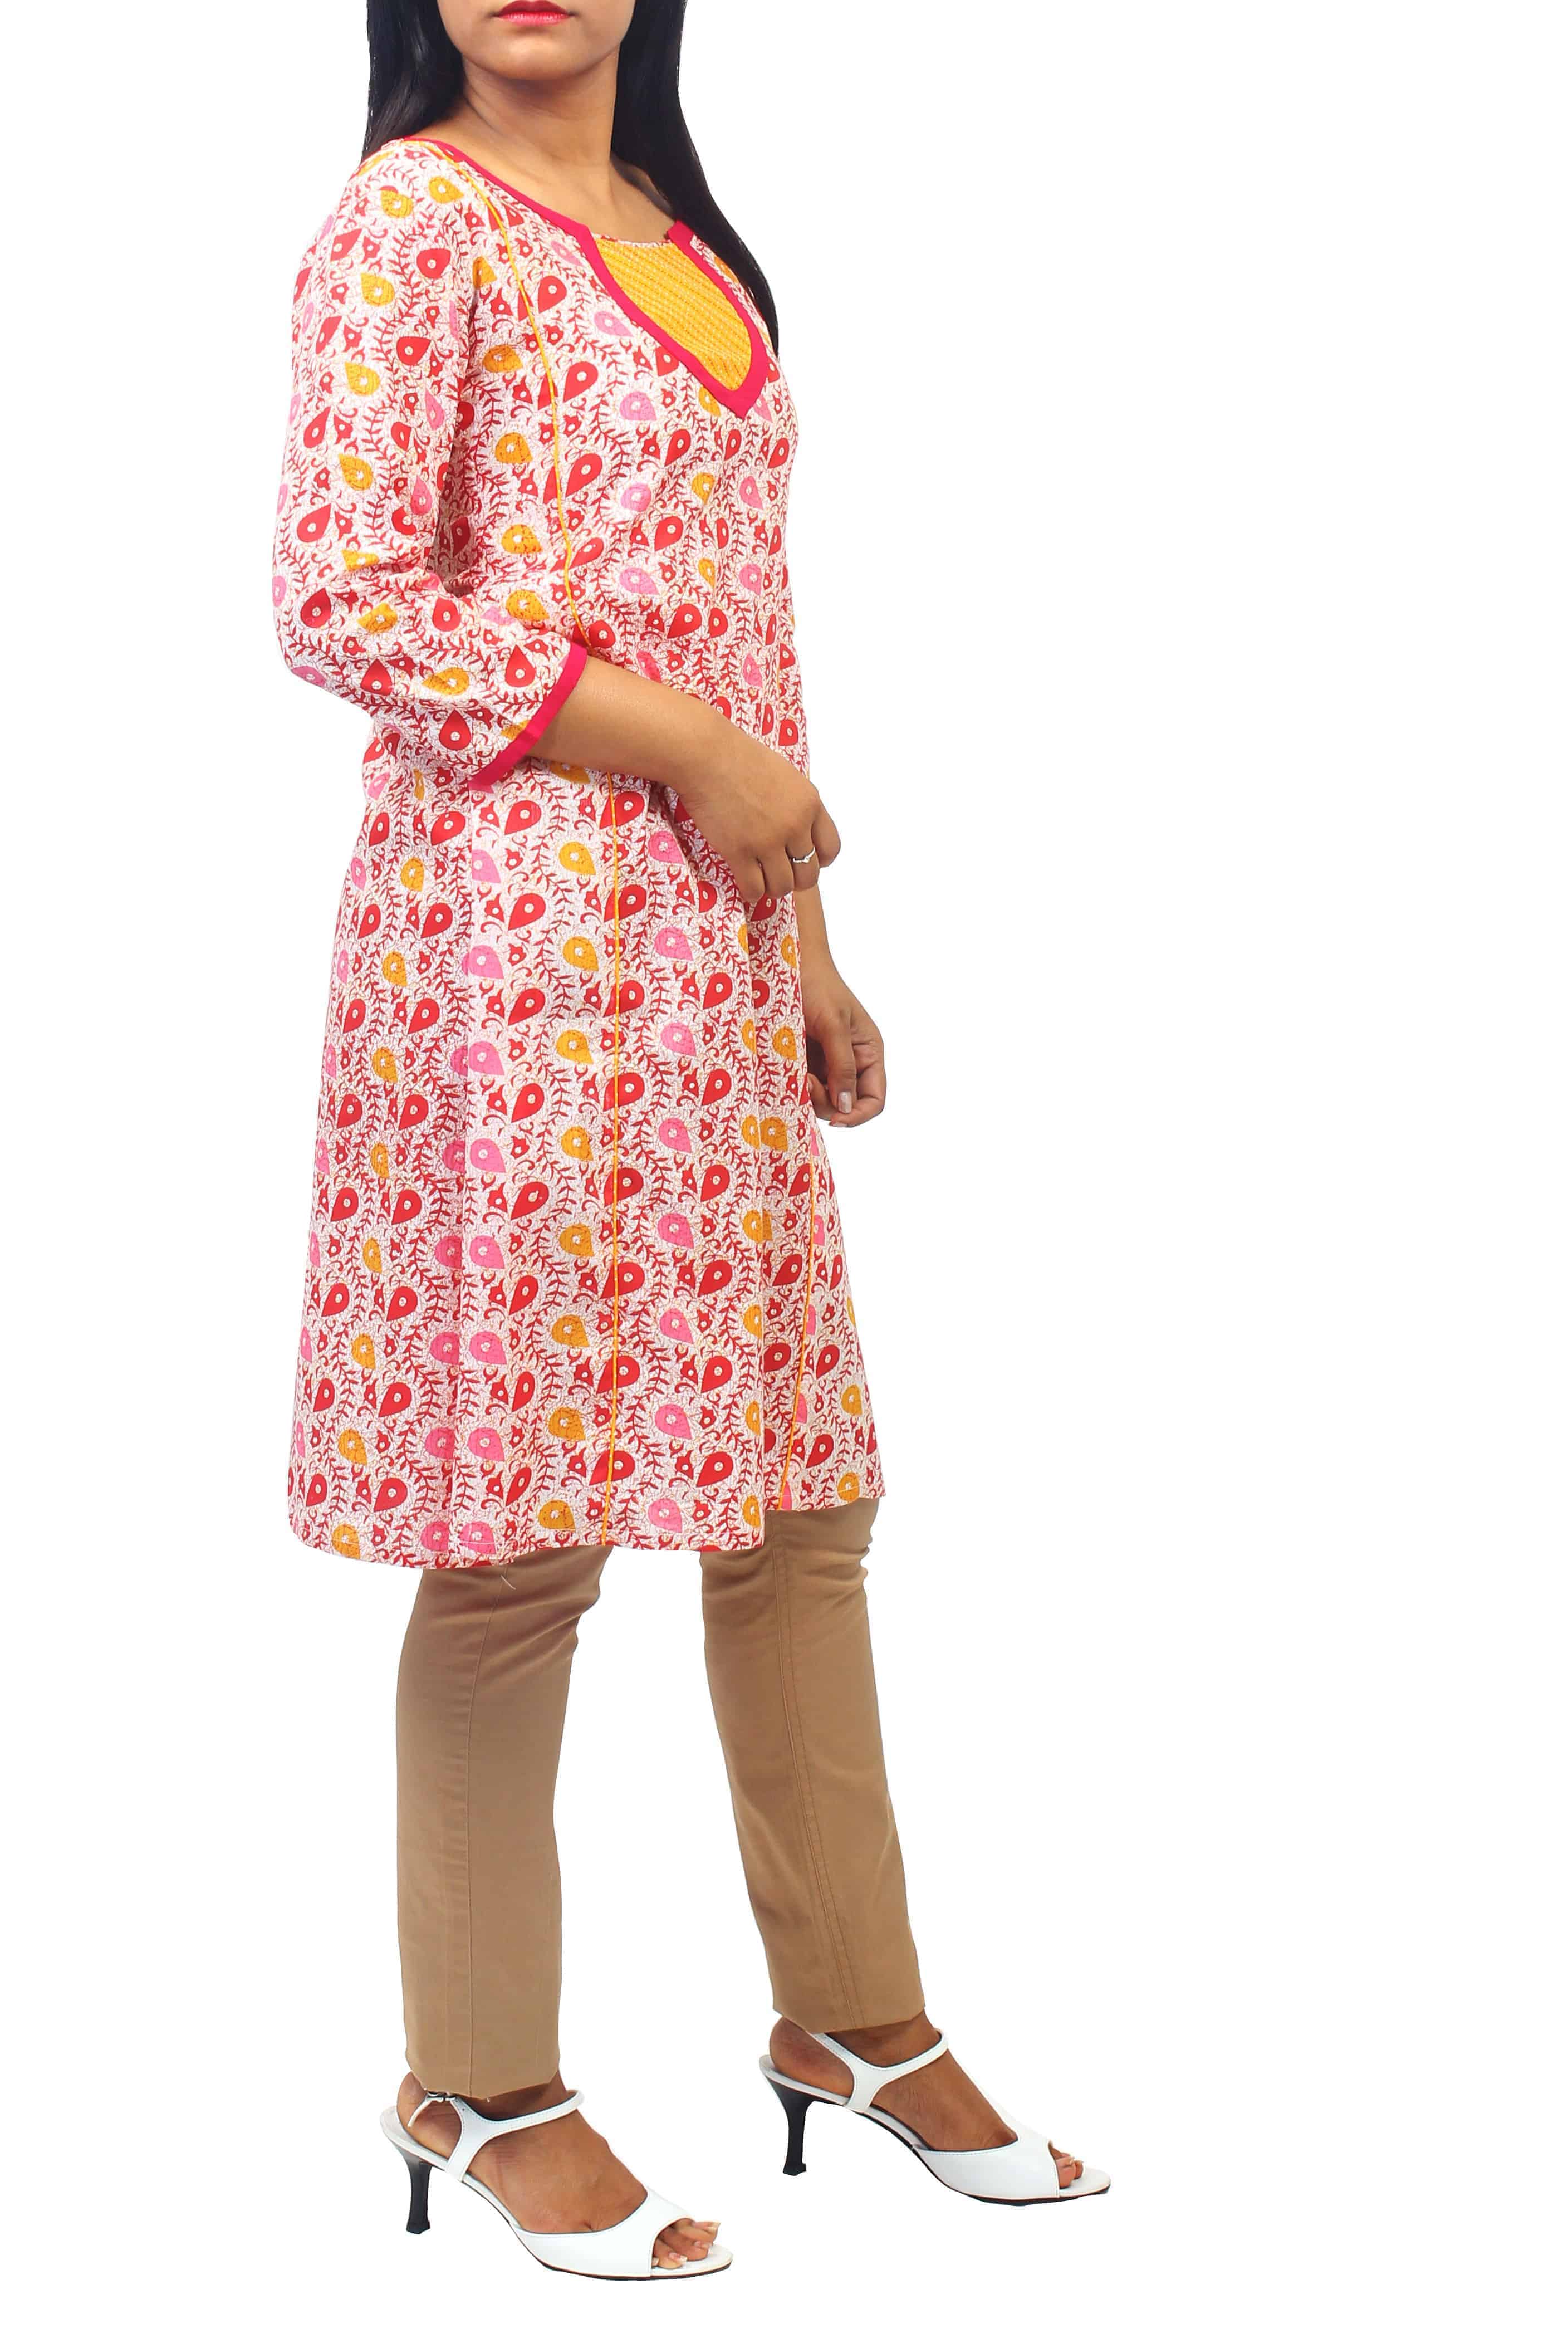 Pretty Red, Yellow and Cream Printed Cotton Kurti with Thread Work Yoke Details-ROK067